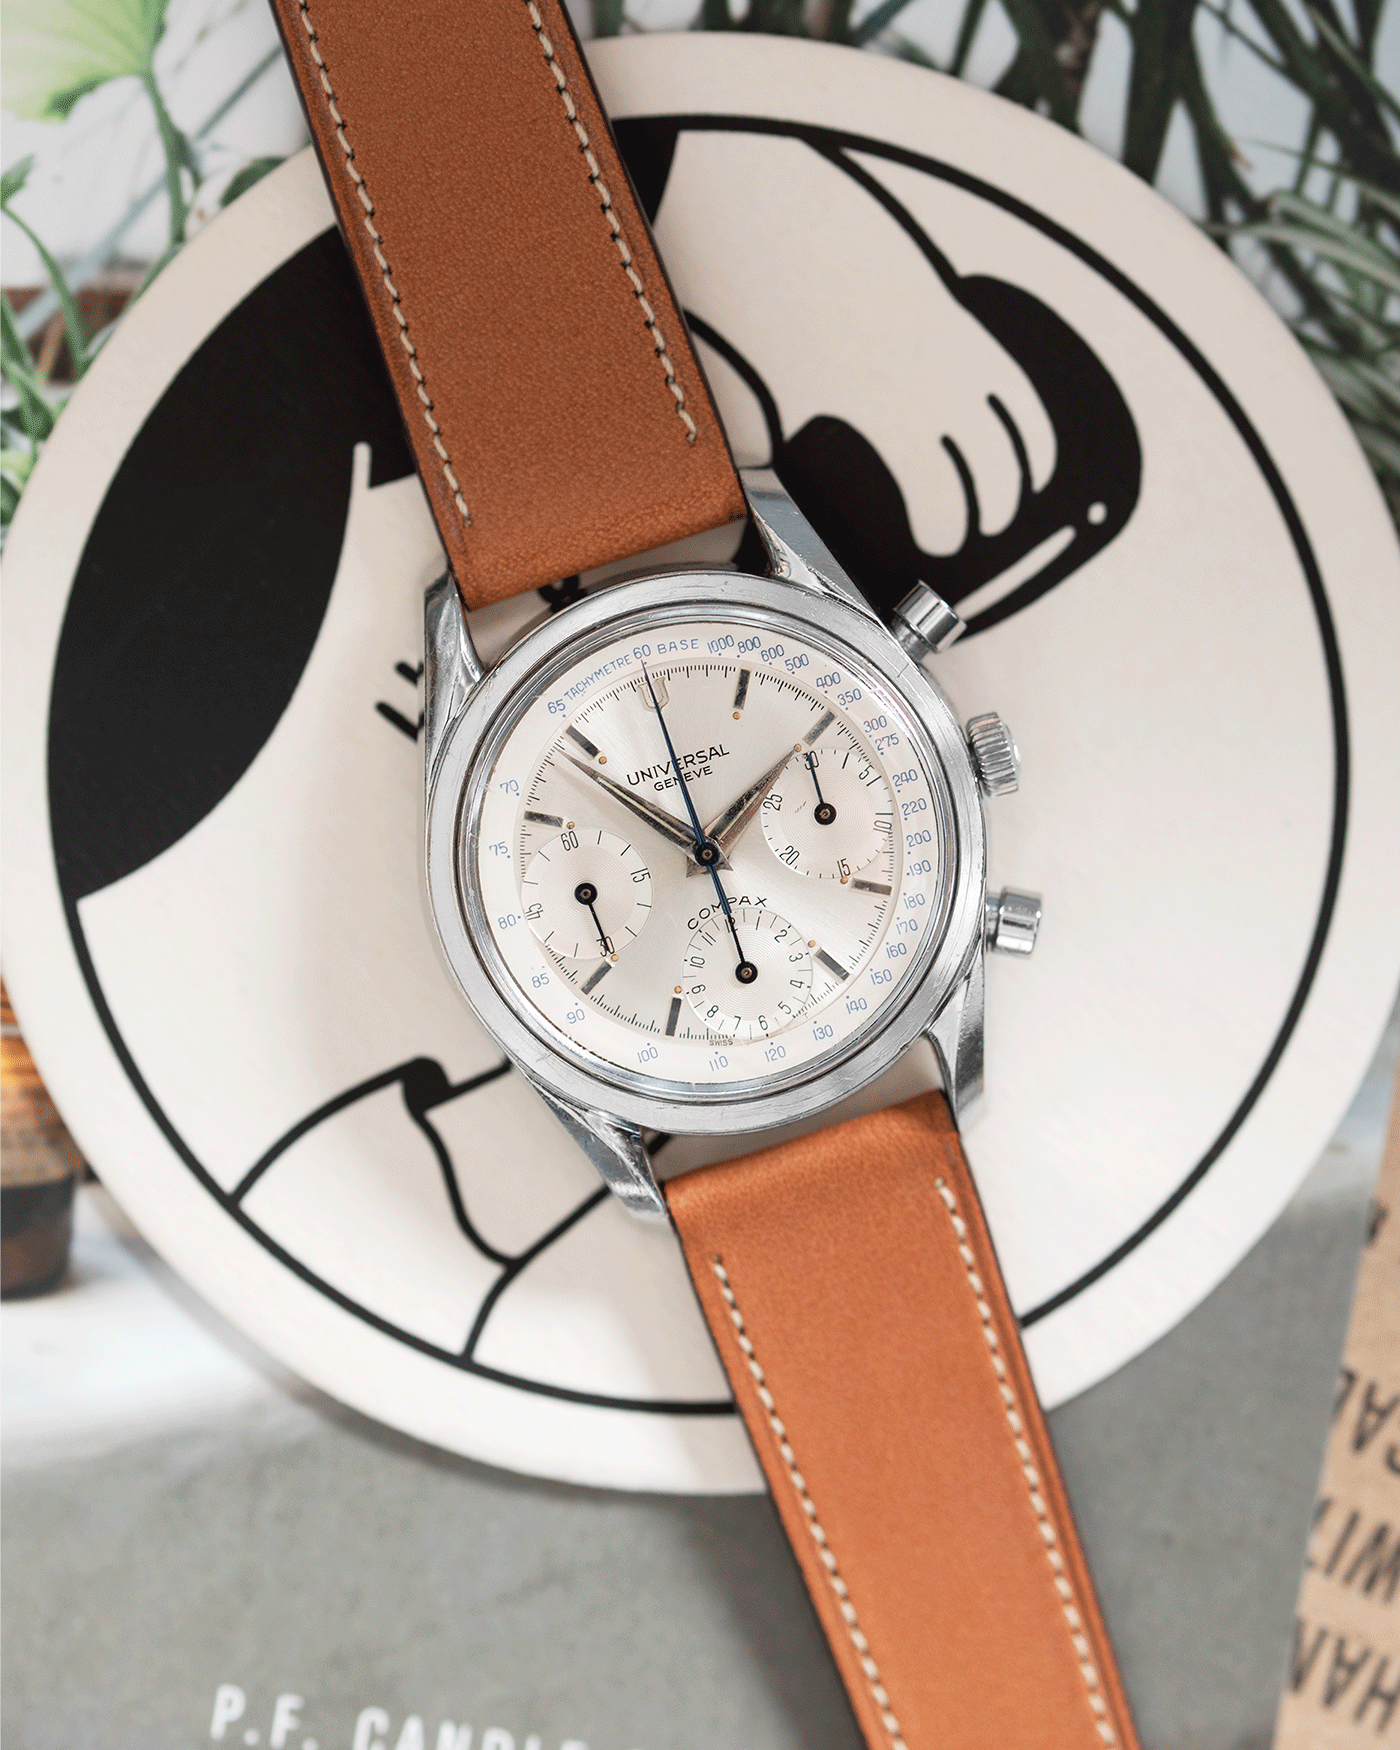 Universal Geneve Compax 22705-1 Chronograph Vintage Watch | S.Song Vintage Watches Mark Eleven